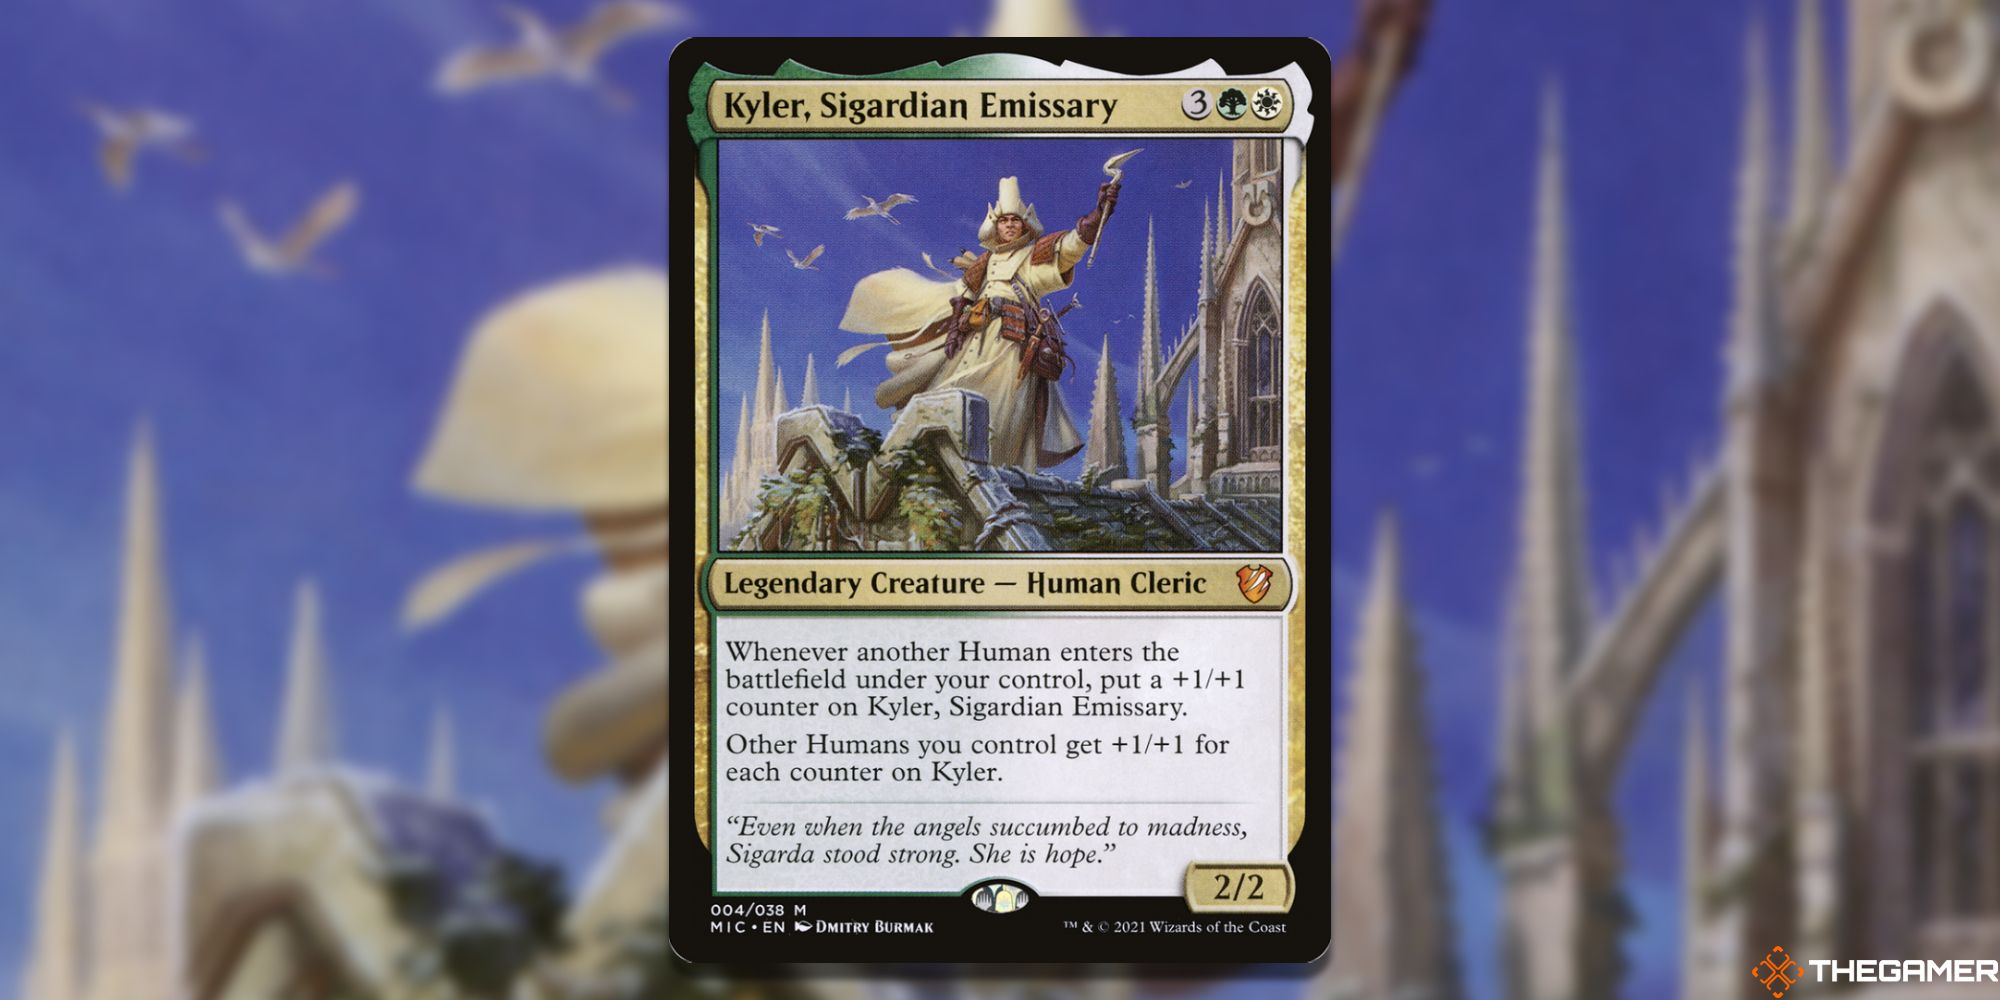 Image of the Kyler, Sigardian Emissary card in Magic: The Gathering, with art by Dmitry Burmak